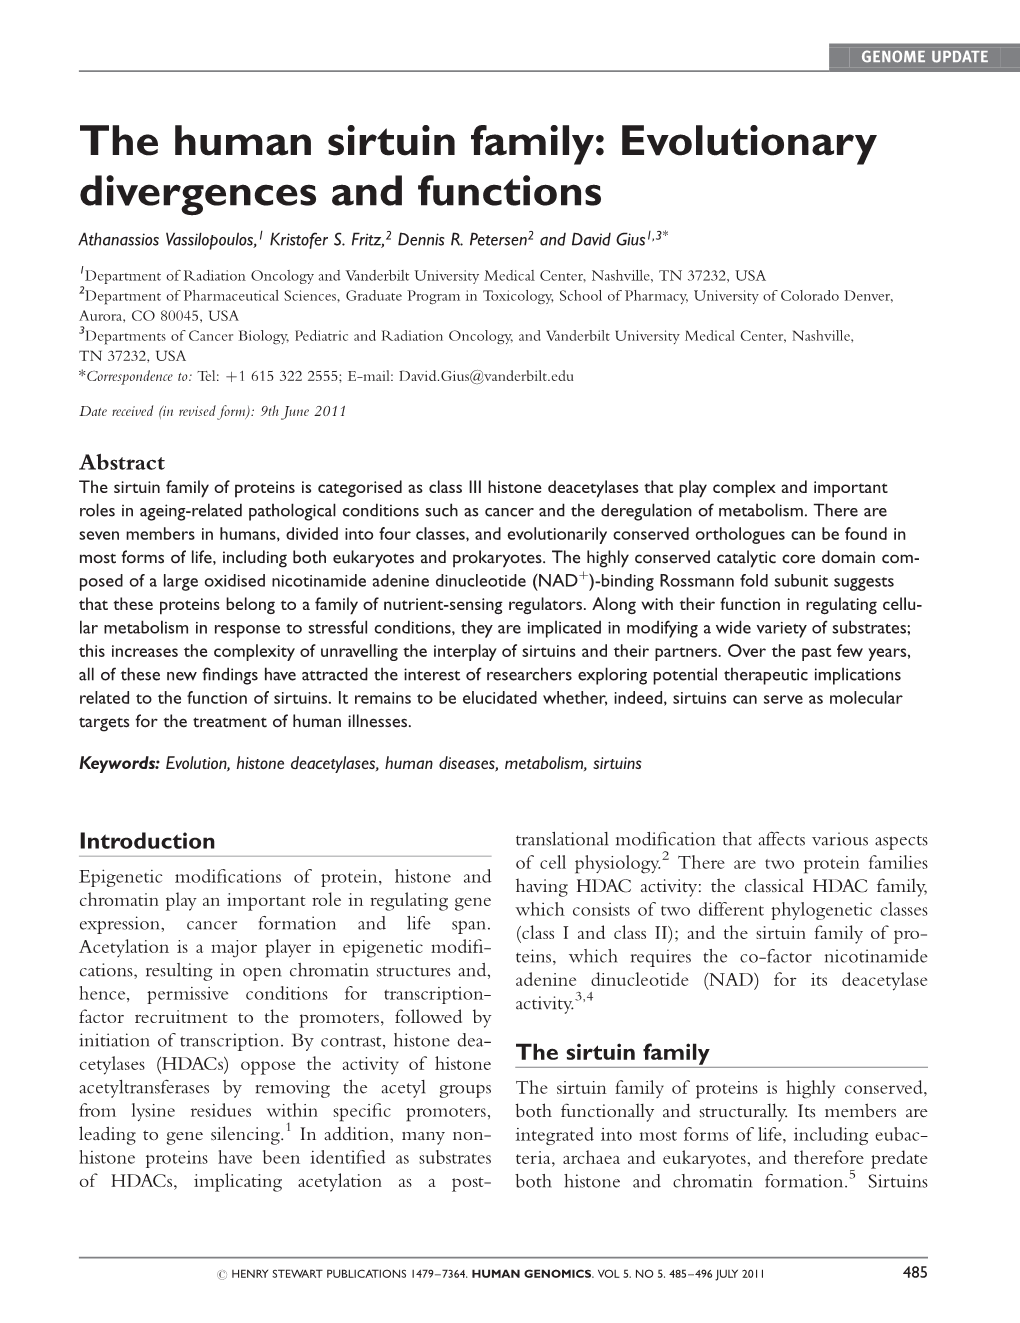 The Human Sirtuin Family: Evolutionary Divergences and Functions Athanassios Vassilopoulos,1 Kristofer S